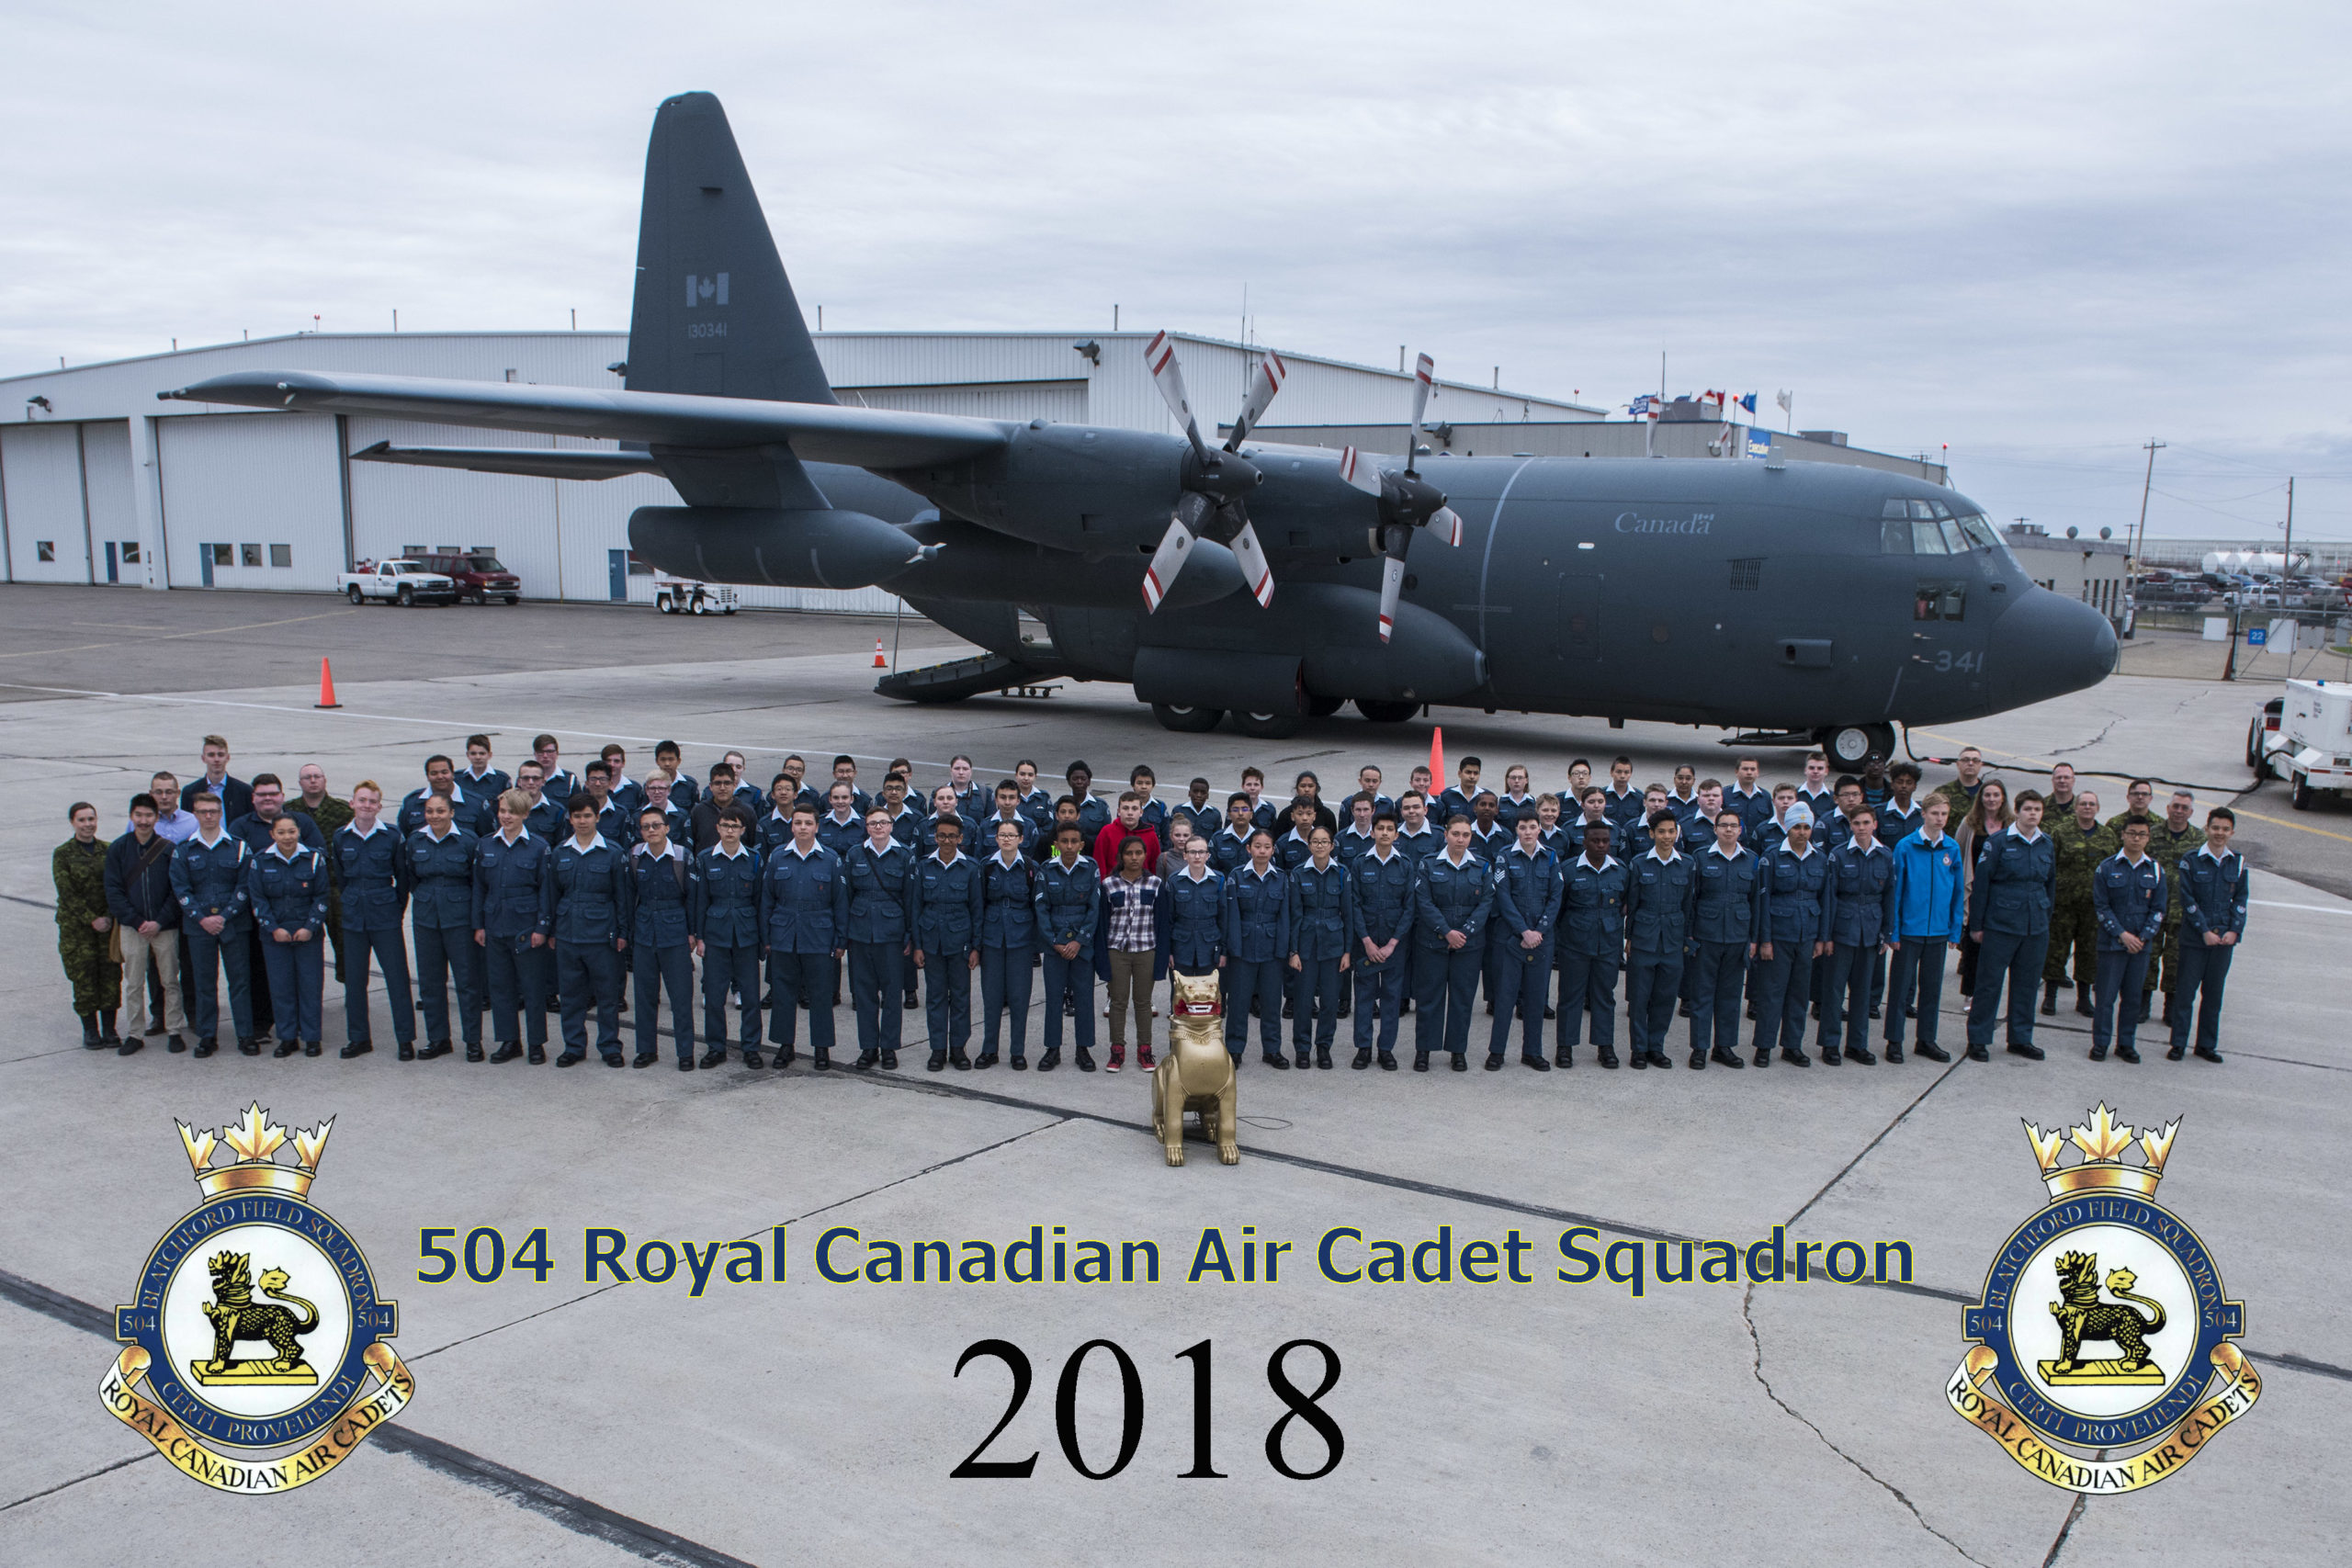 A photo of the 504 Squadron Cadets at EFC’s facility in Edmonton!